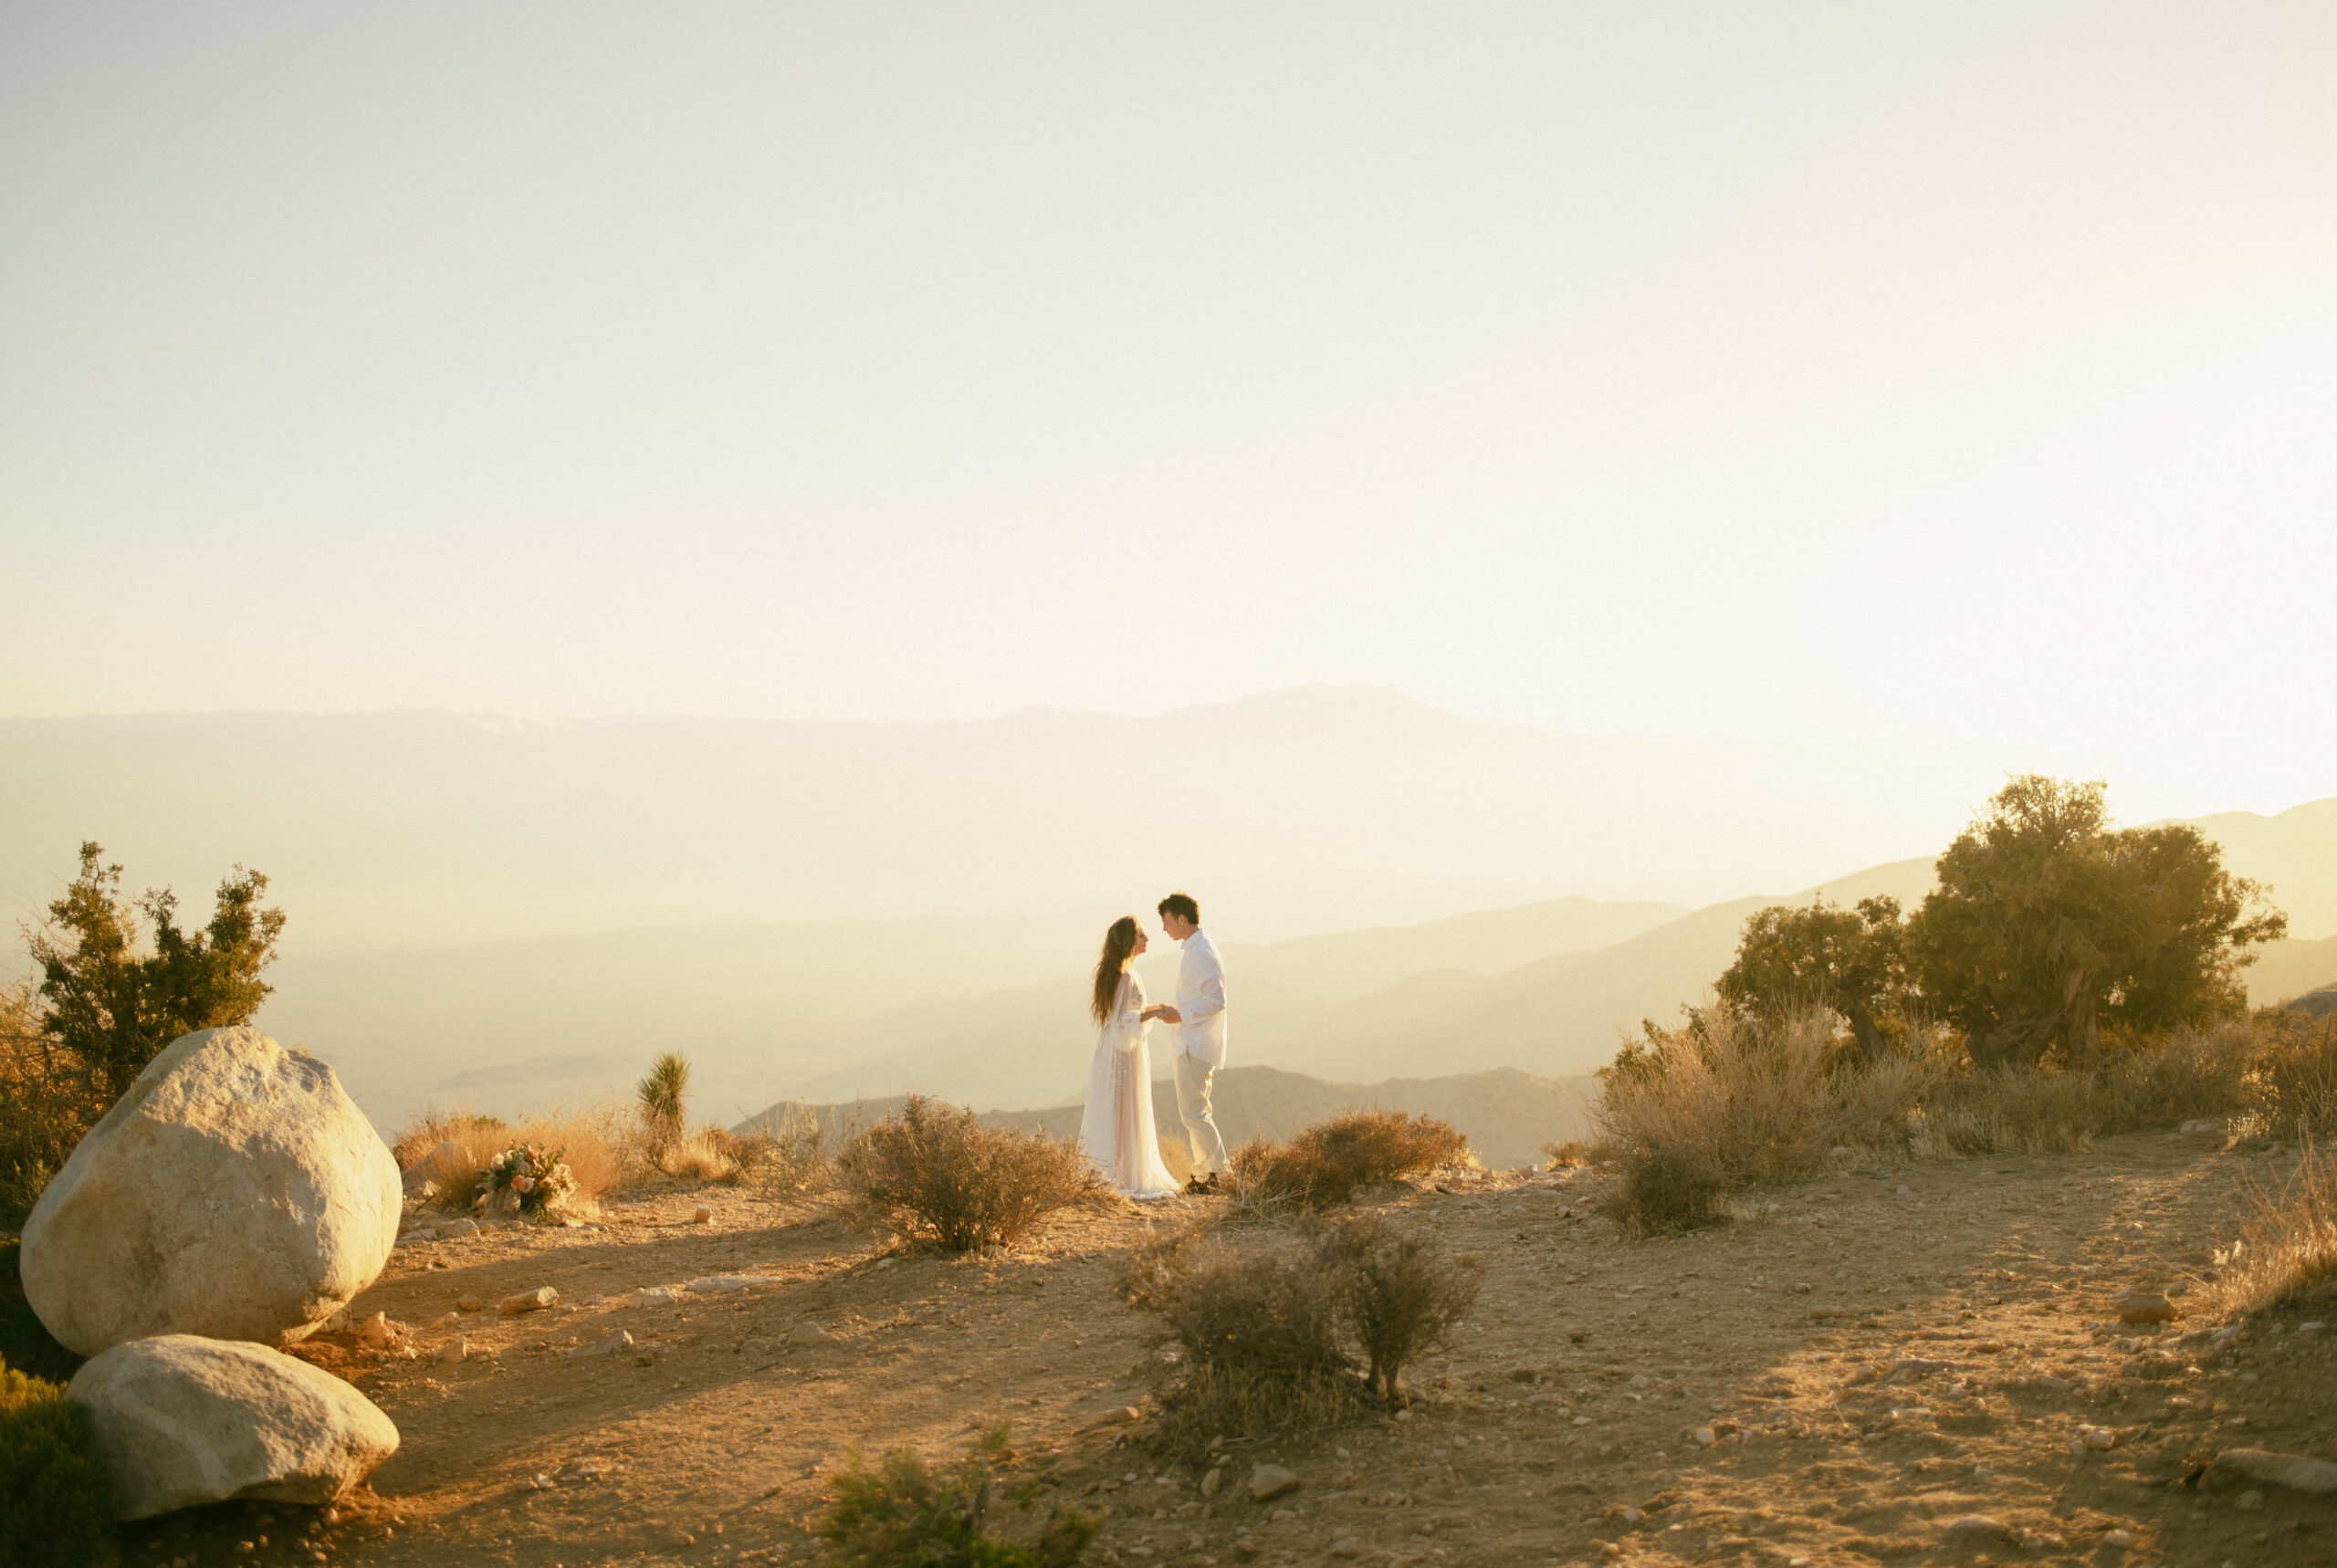 Key's View serves as a gorgeous destination elopement location in Joshua Tree National Park with it's stunning golden hour views and easily accessible mountain top.